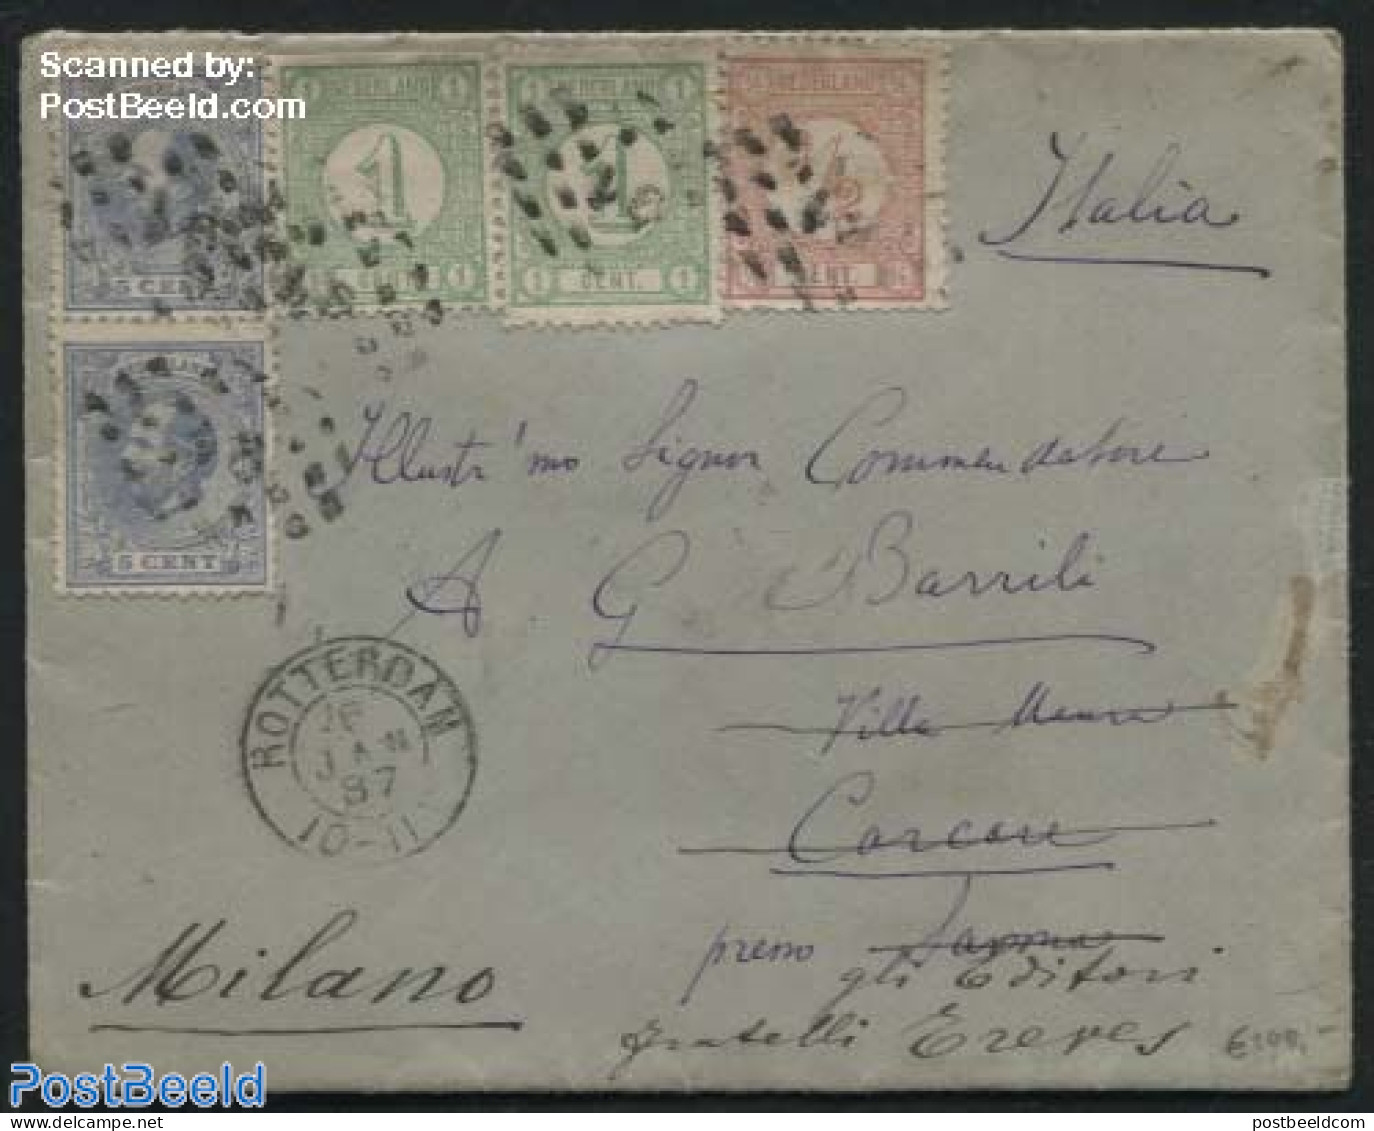 Netherlands 1887 Letter To Italy With Mixed Postage, Postal History - Covers & Documents